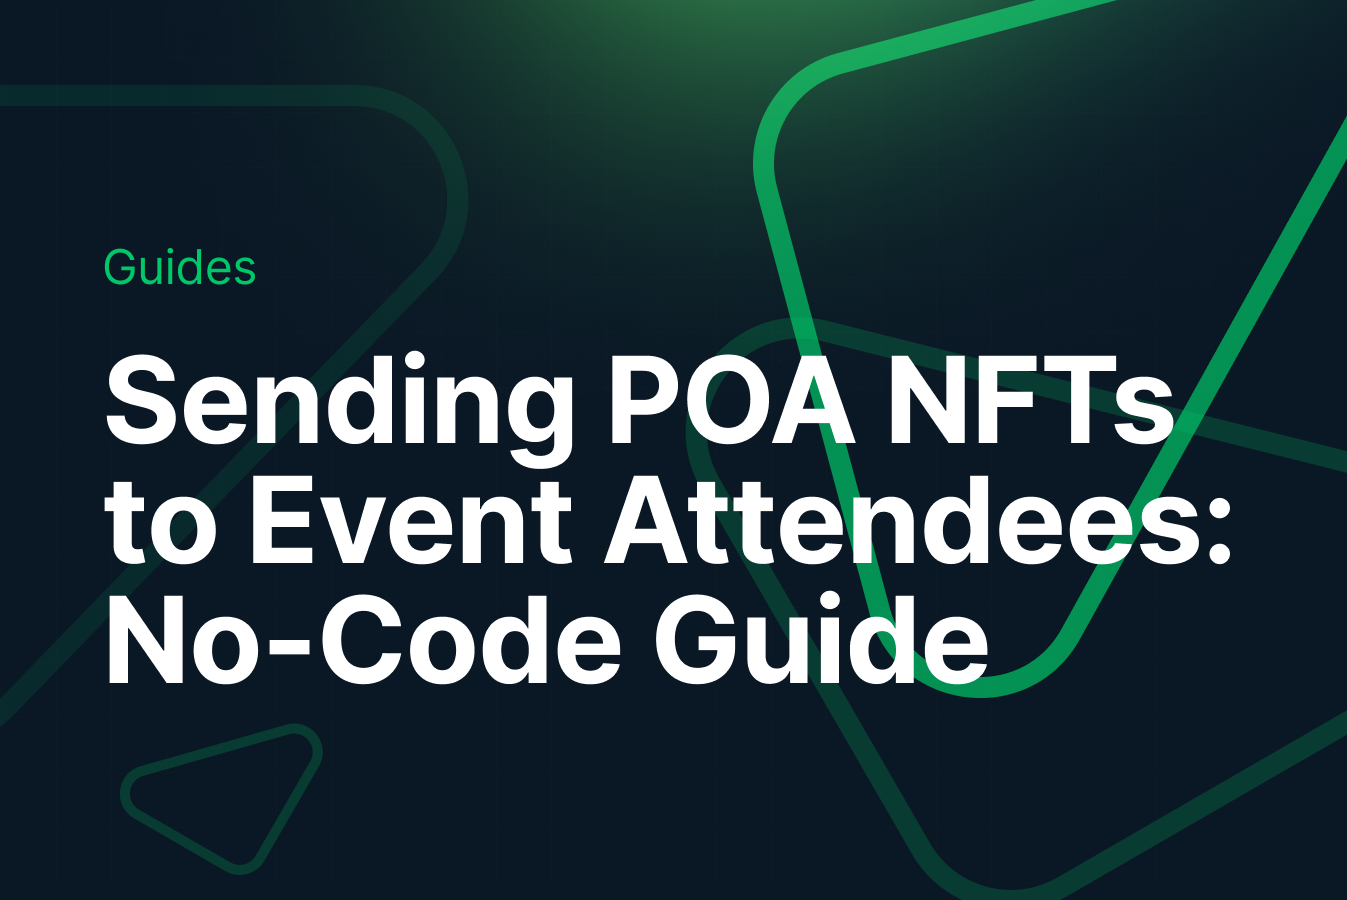 Sending POA NFTs to Event Attendees: No-Code Guide